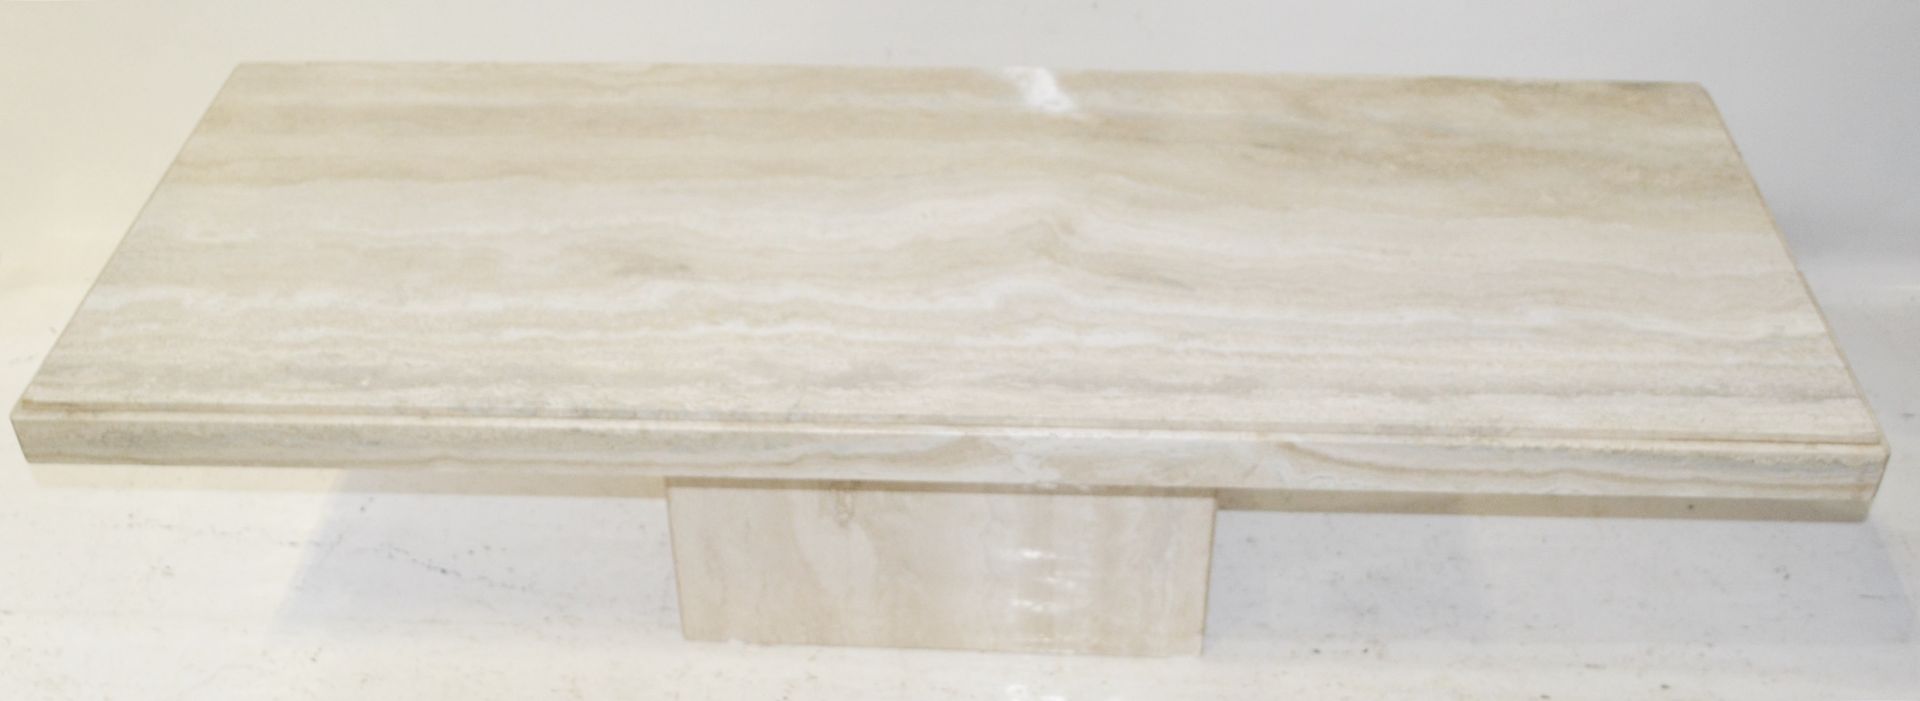 1 x STONE INTERNATIONAL Long Rectangular Italian Marble Table - Used, In Good Condition *No VAT*